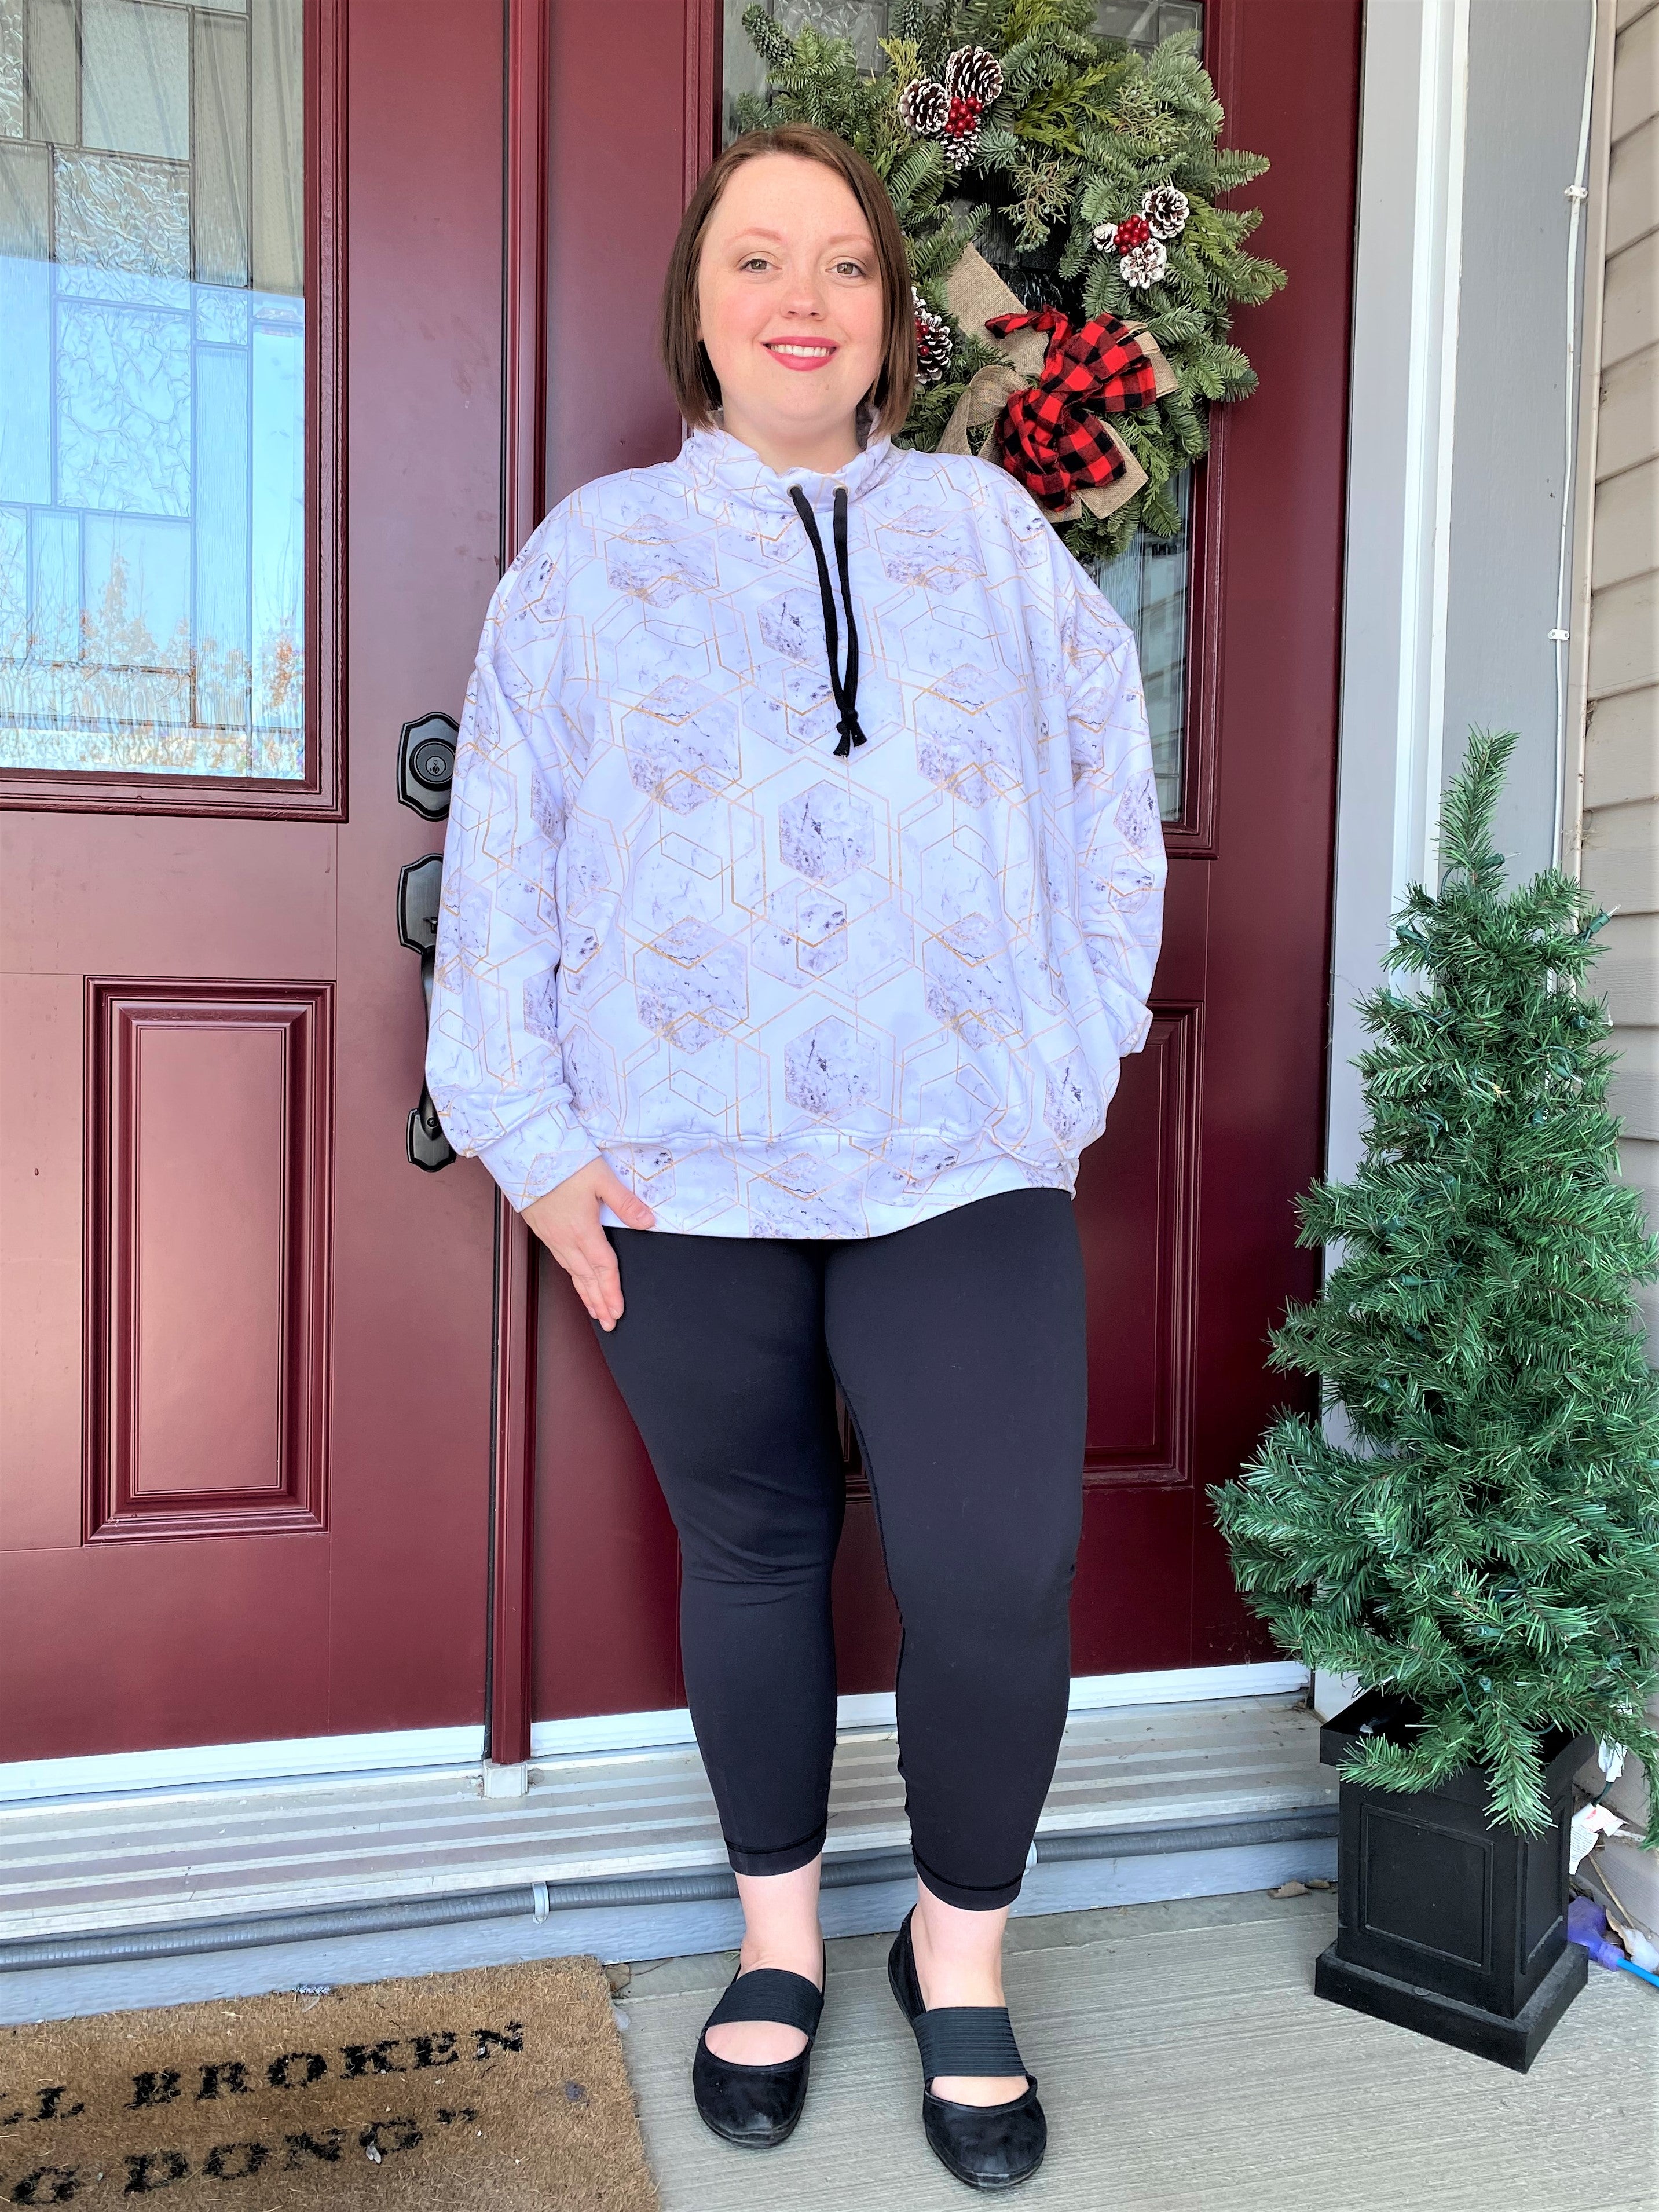 GreenStyle Open Back Pullover and Stride Tights – Sewing with Sarah